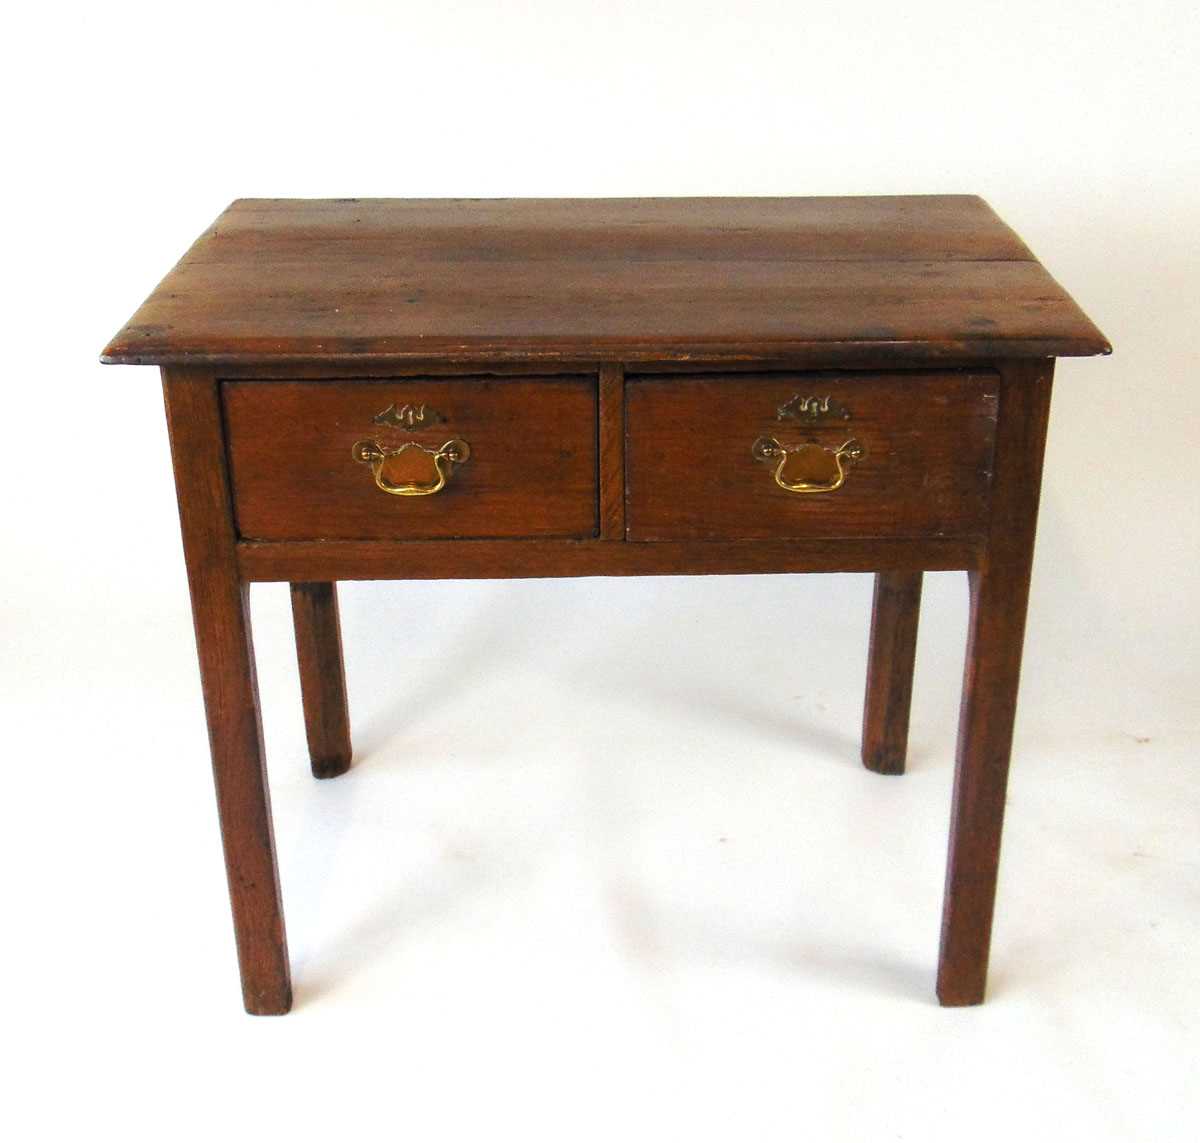 An 18th century oak side table, the two plank top with moulded edge over two drawers, on square